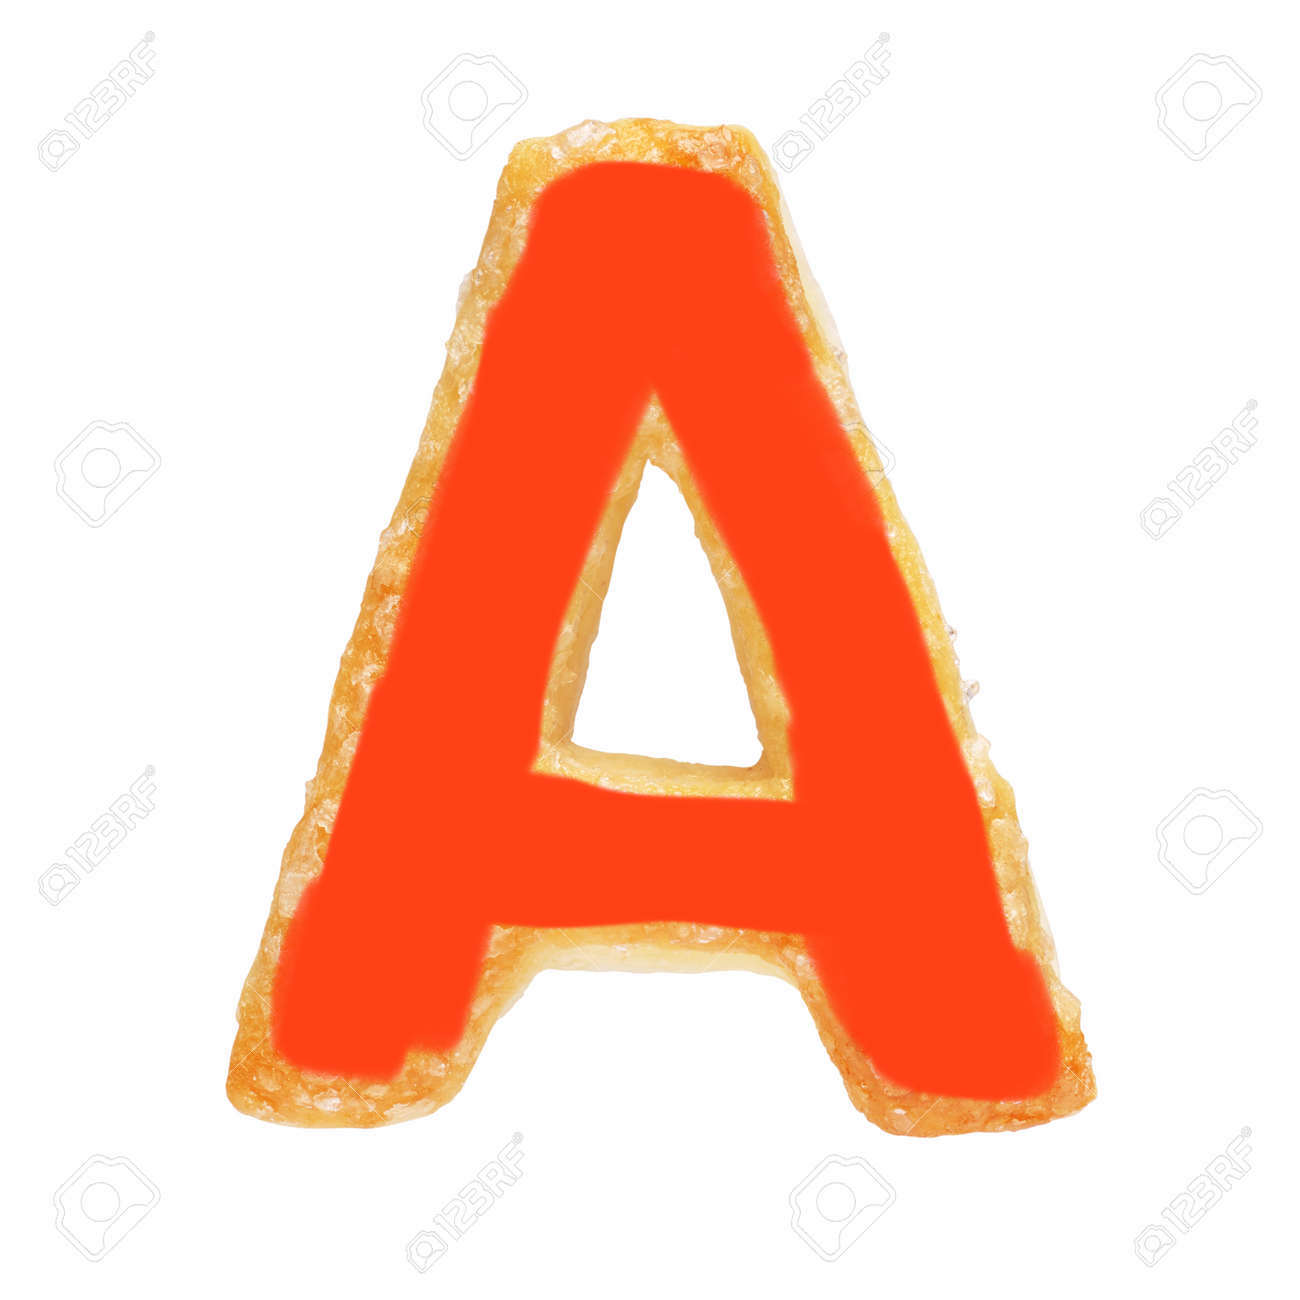  Letter A From Baked Dough या Cookie